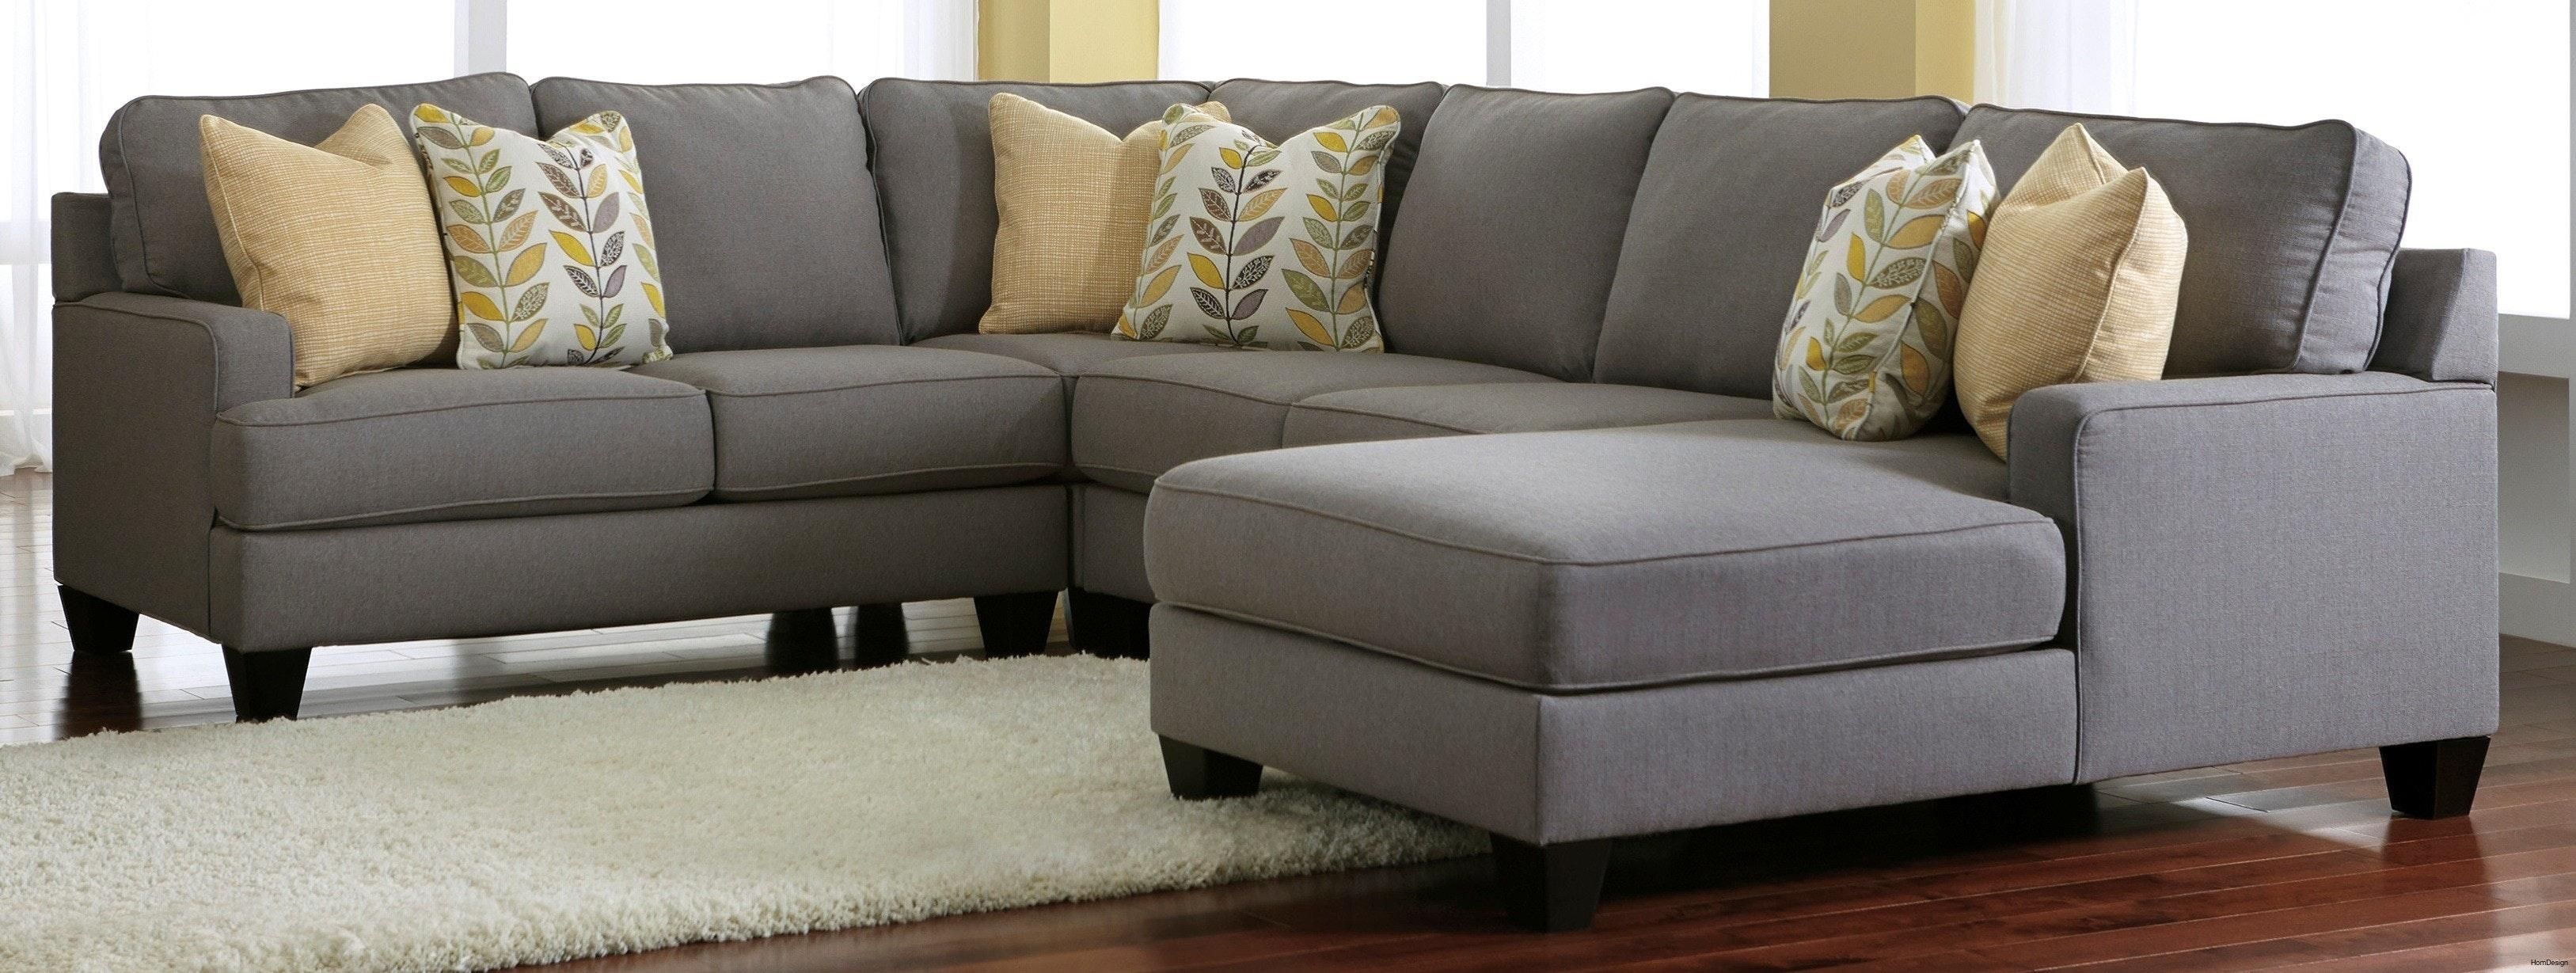 Furniture : Sectional Couch Costco Fresh Sectional Sofa Chaise In Virginia Beach Sectional Sofas (View 8 of 10)